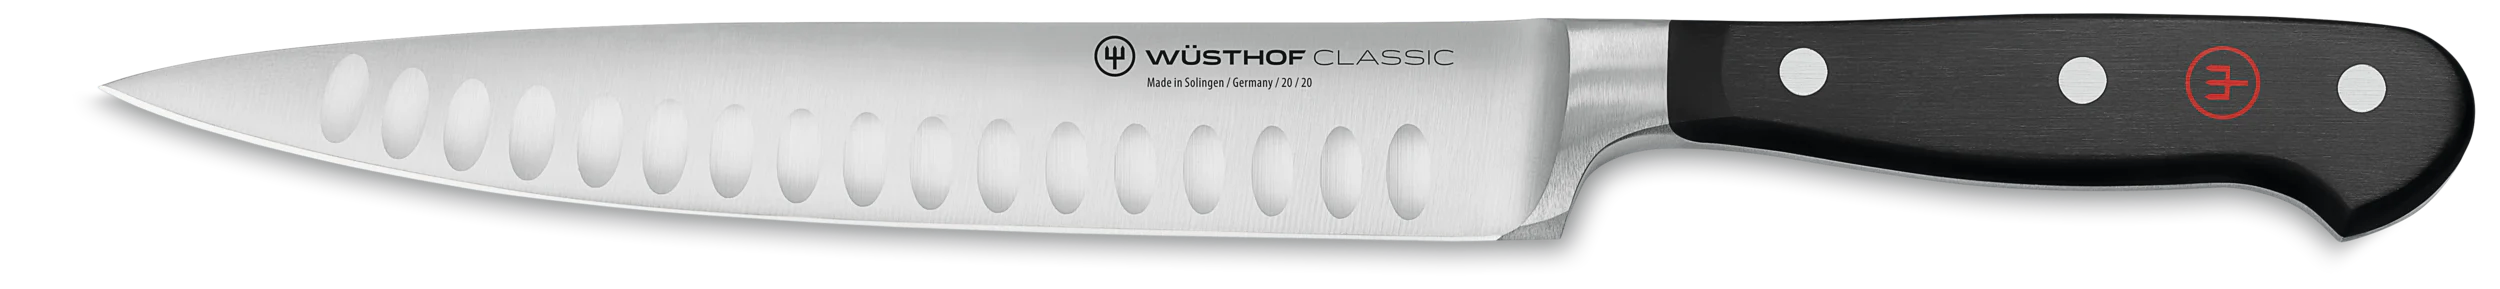 Wusthof Classice 8 inch Carver knife-Hollow Edge